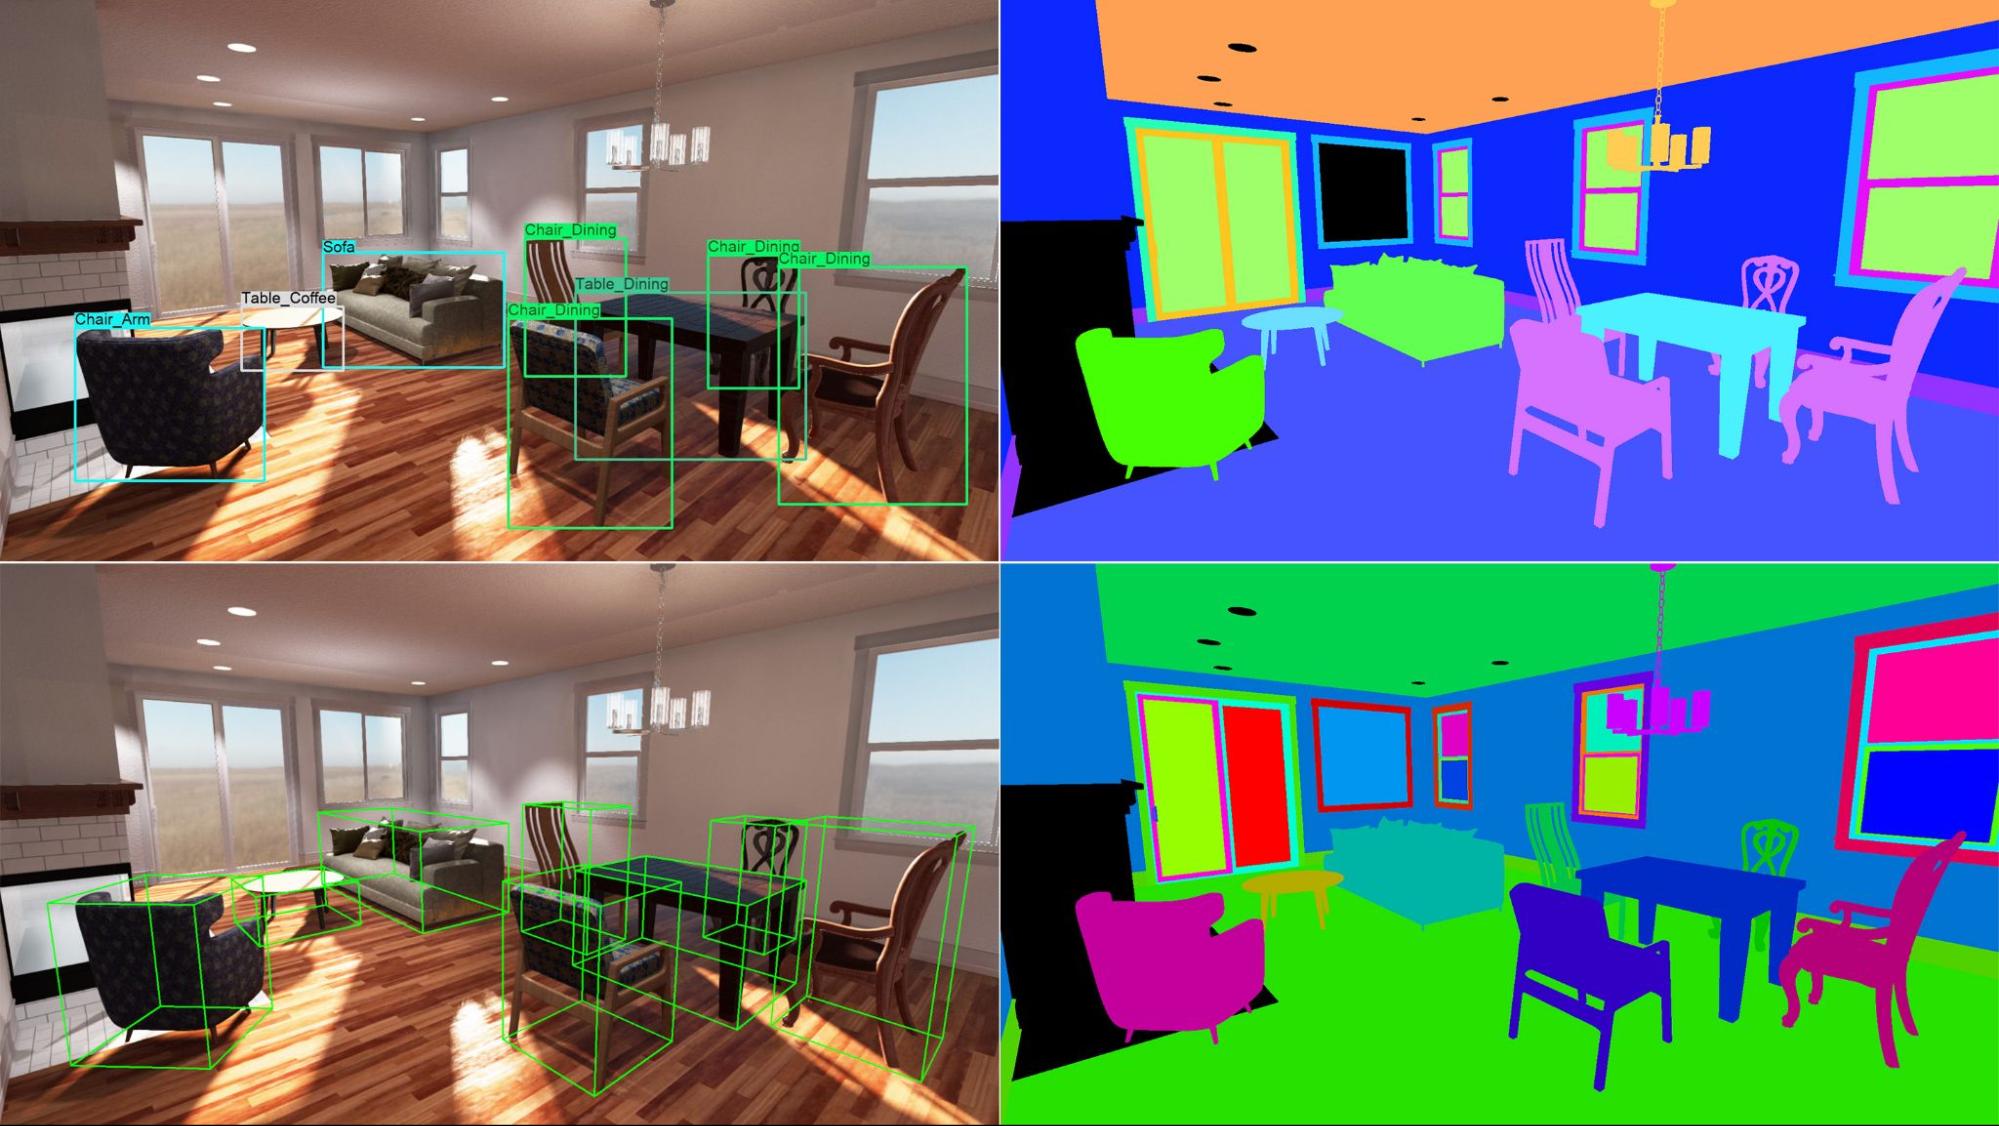 The four types of ground truth included in the Home Interiors dataset. Top left: 2D bounding boxes, Bottom left: 3D bounding boxes, Top right: semantic segmentation, Bottom right: instance segmentation